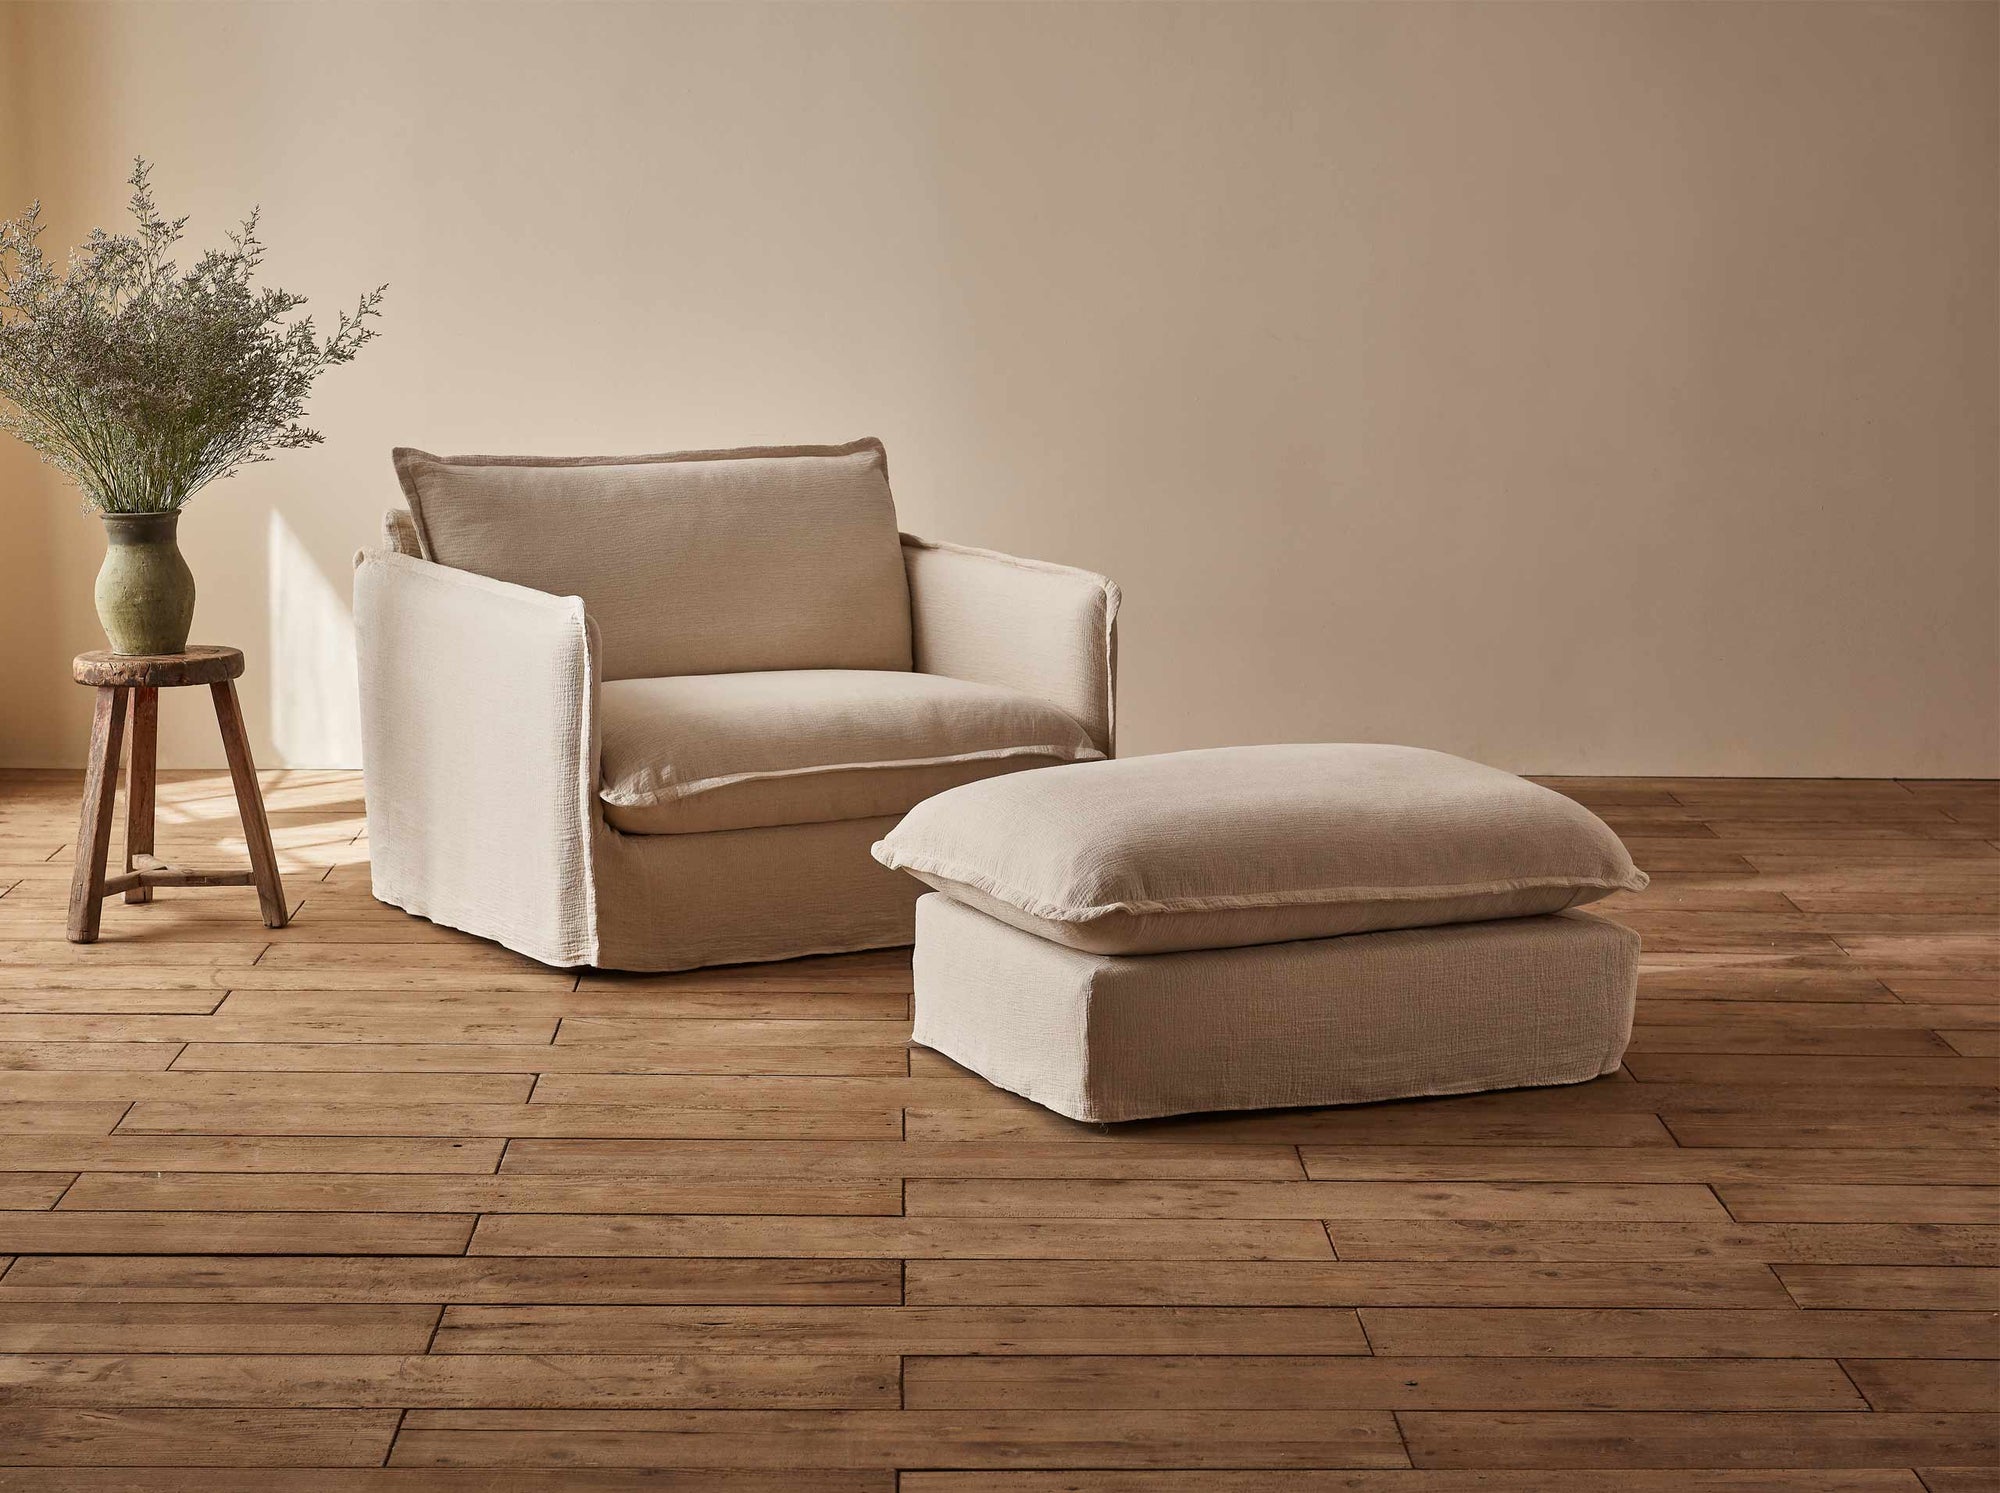 Neva Chair Ottoman in Corn Silk, a light beige Washed Cotton Linen, placed in a sunlit room in front of the Neva Chair